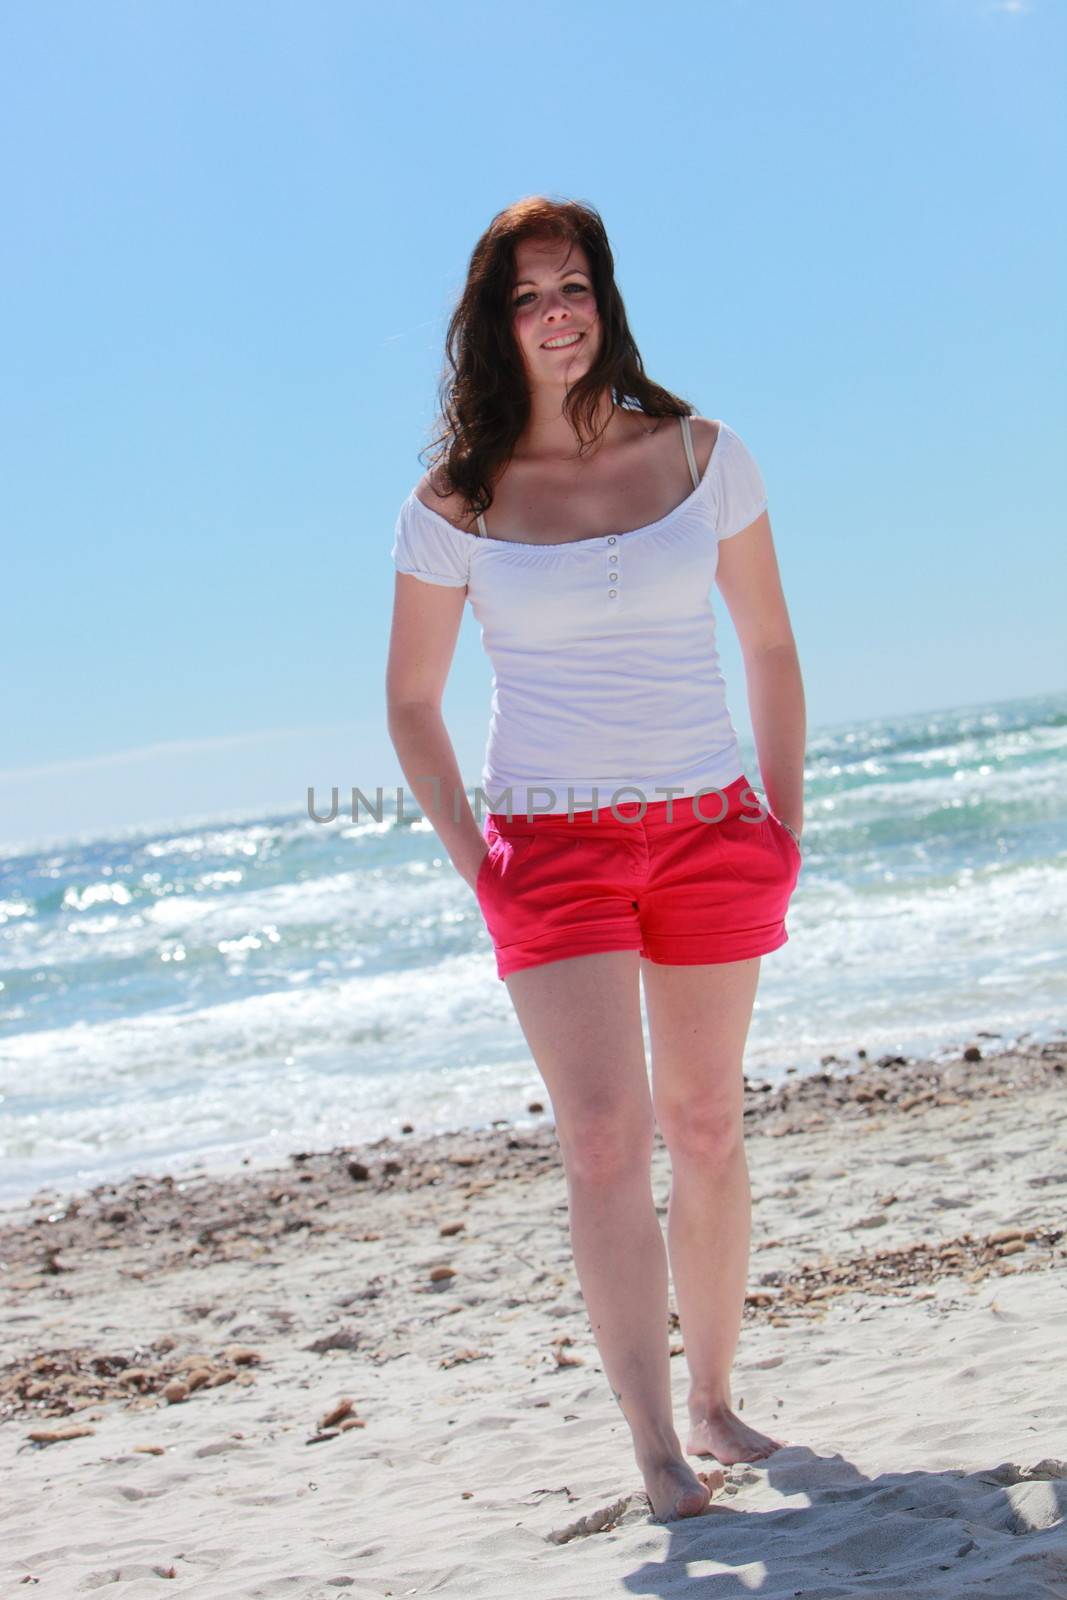 Attractive woman in shorts on the beach by Farina6000